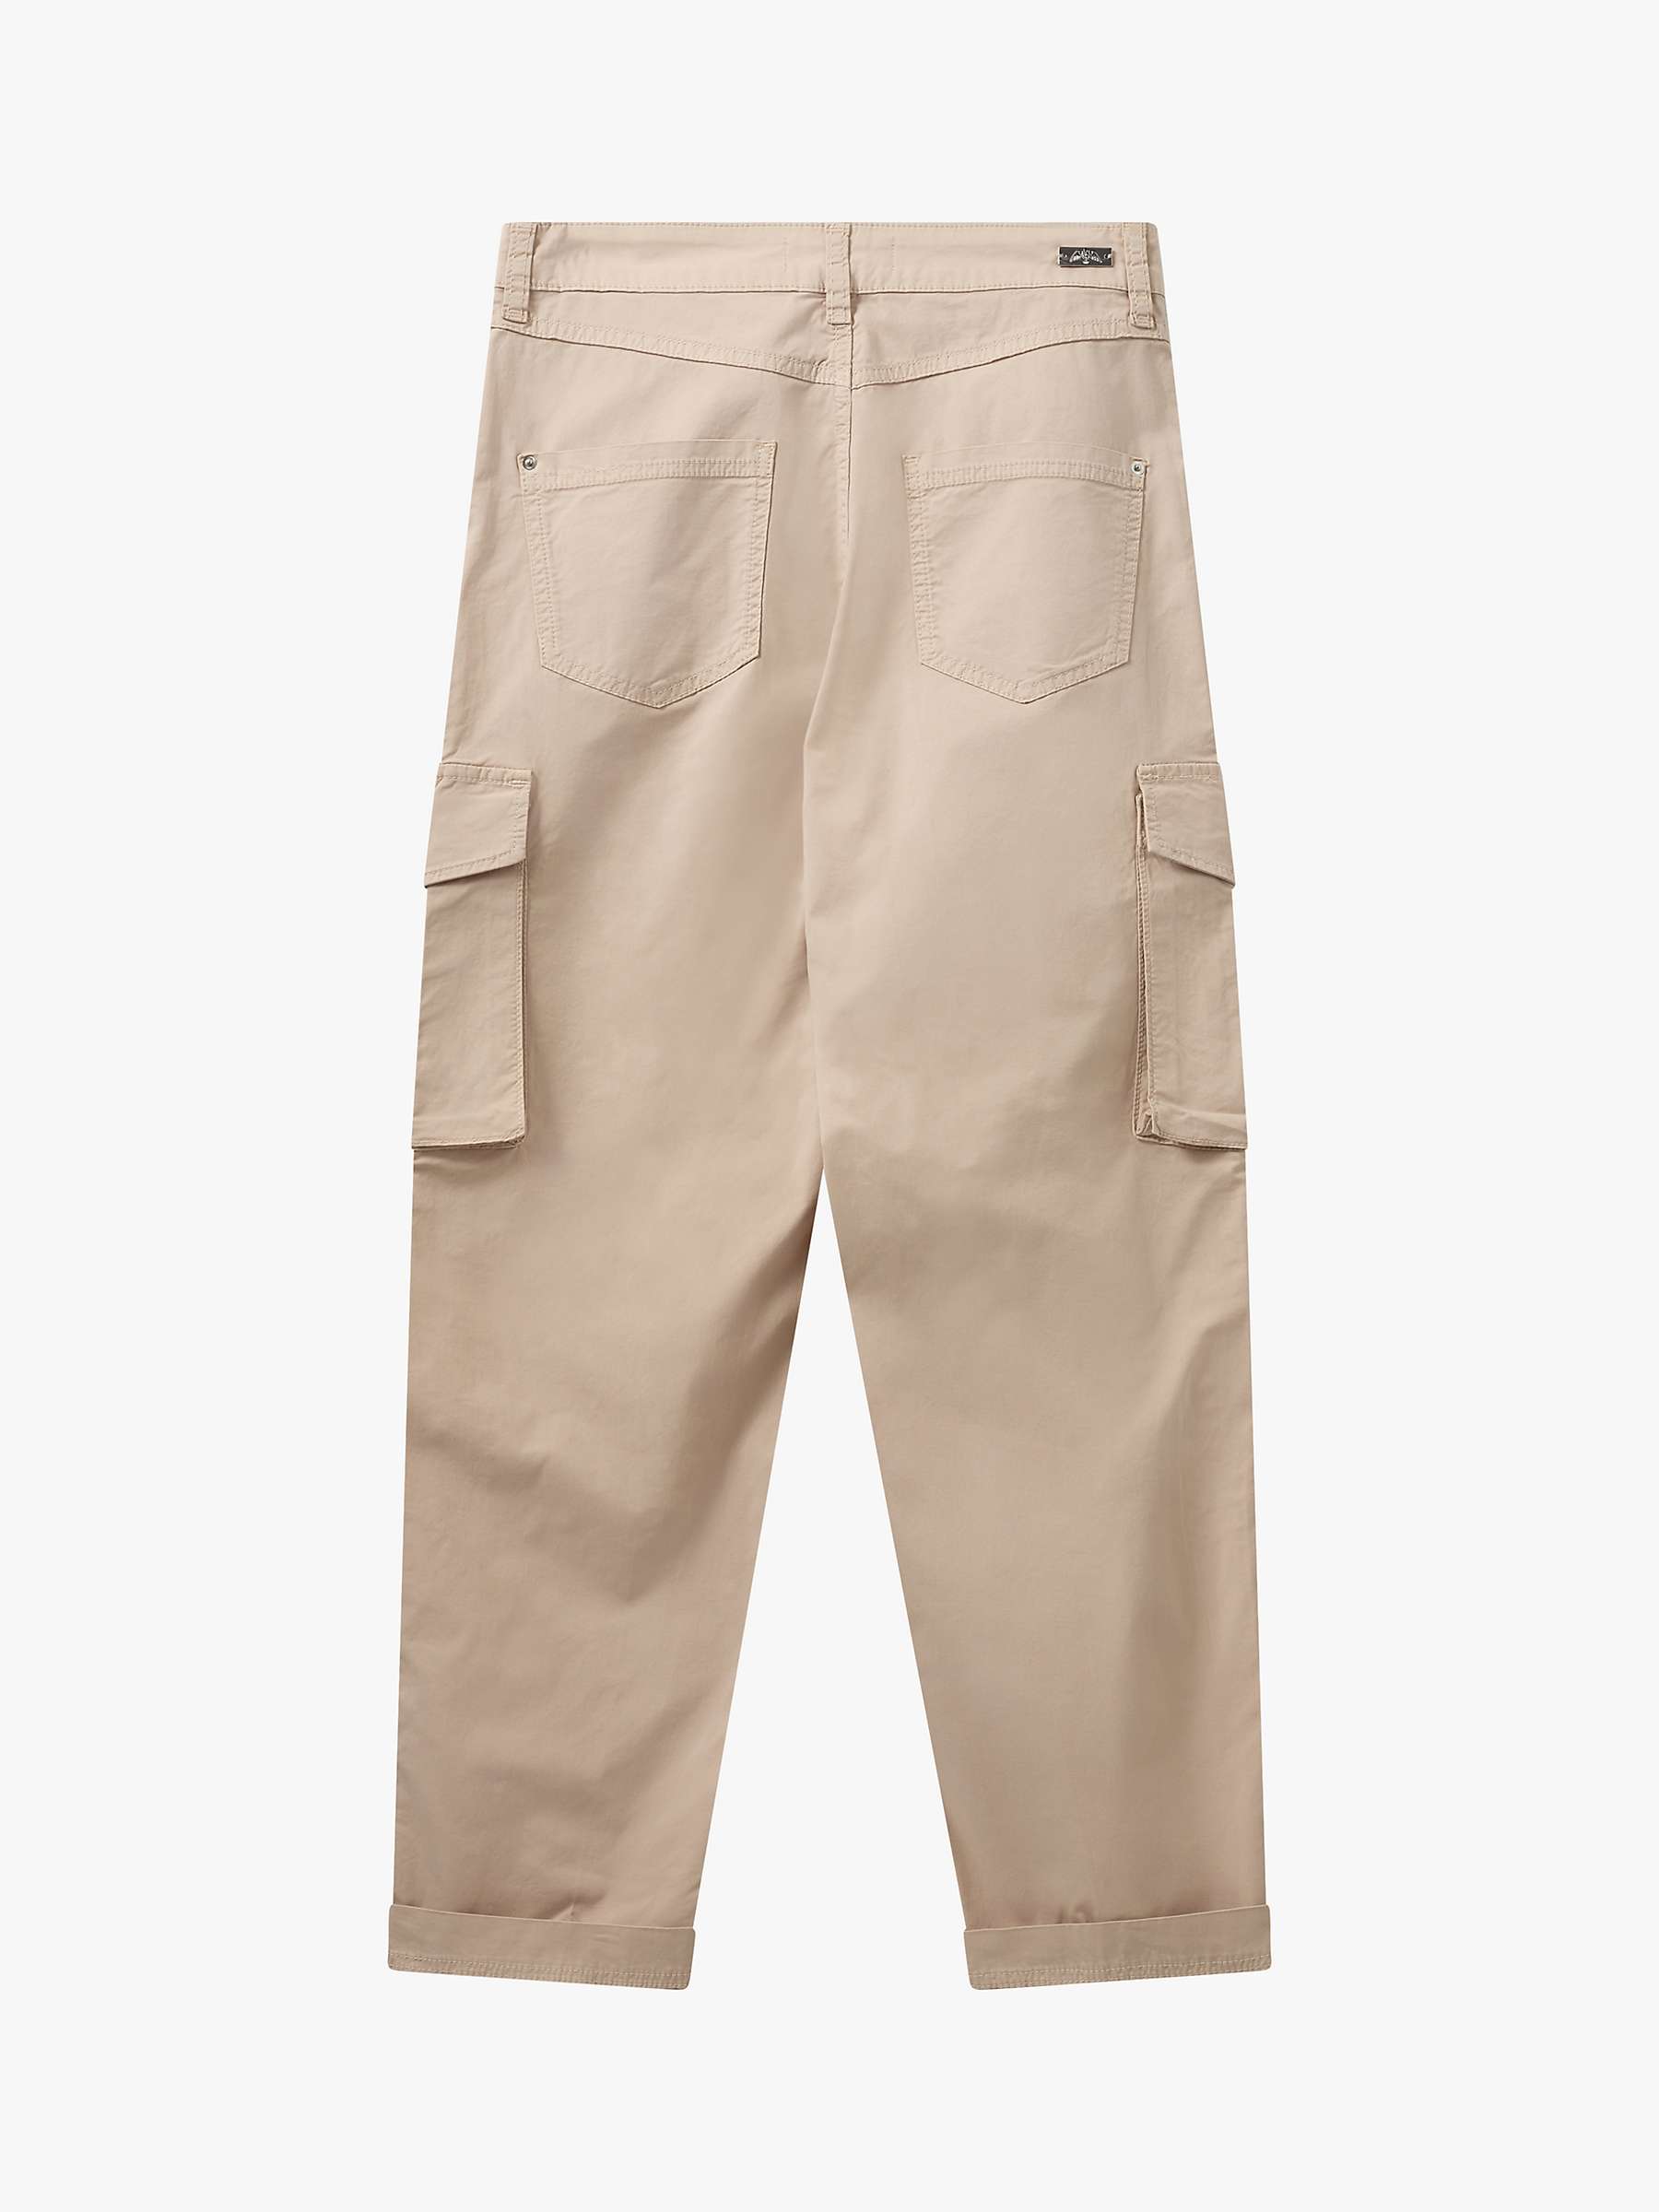 Buy MOS MOSH Adeline Cargo Trousers, Cement Online at johnlewis.com